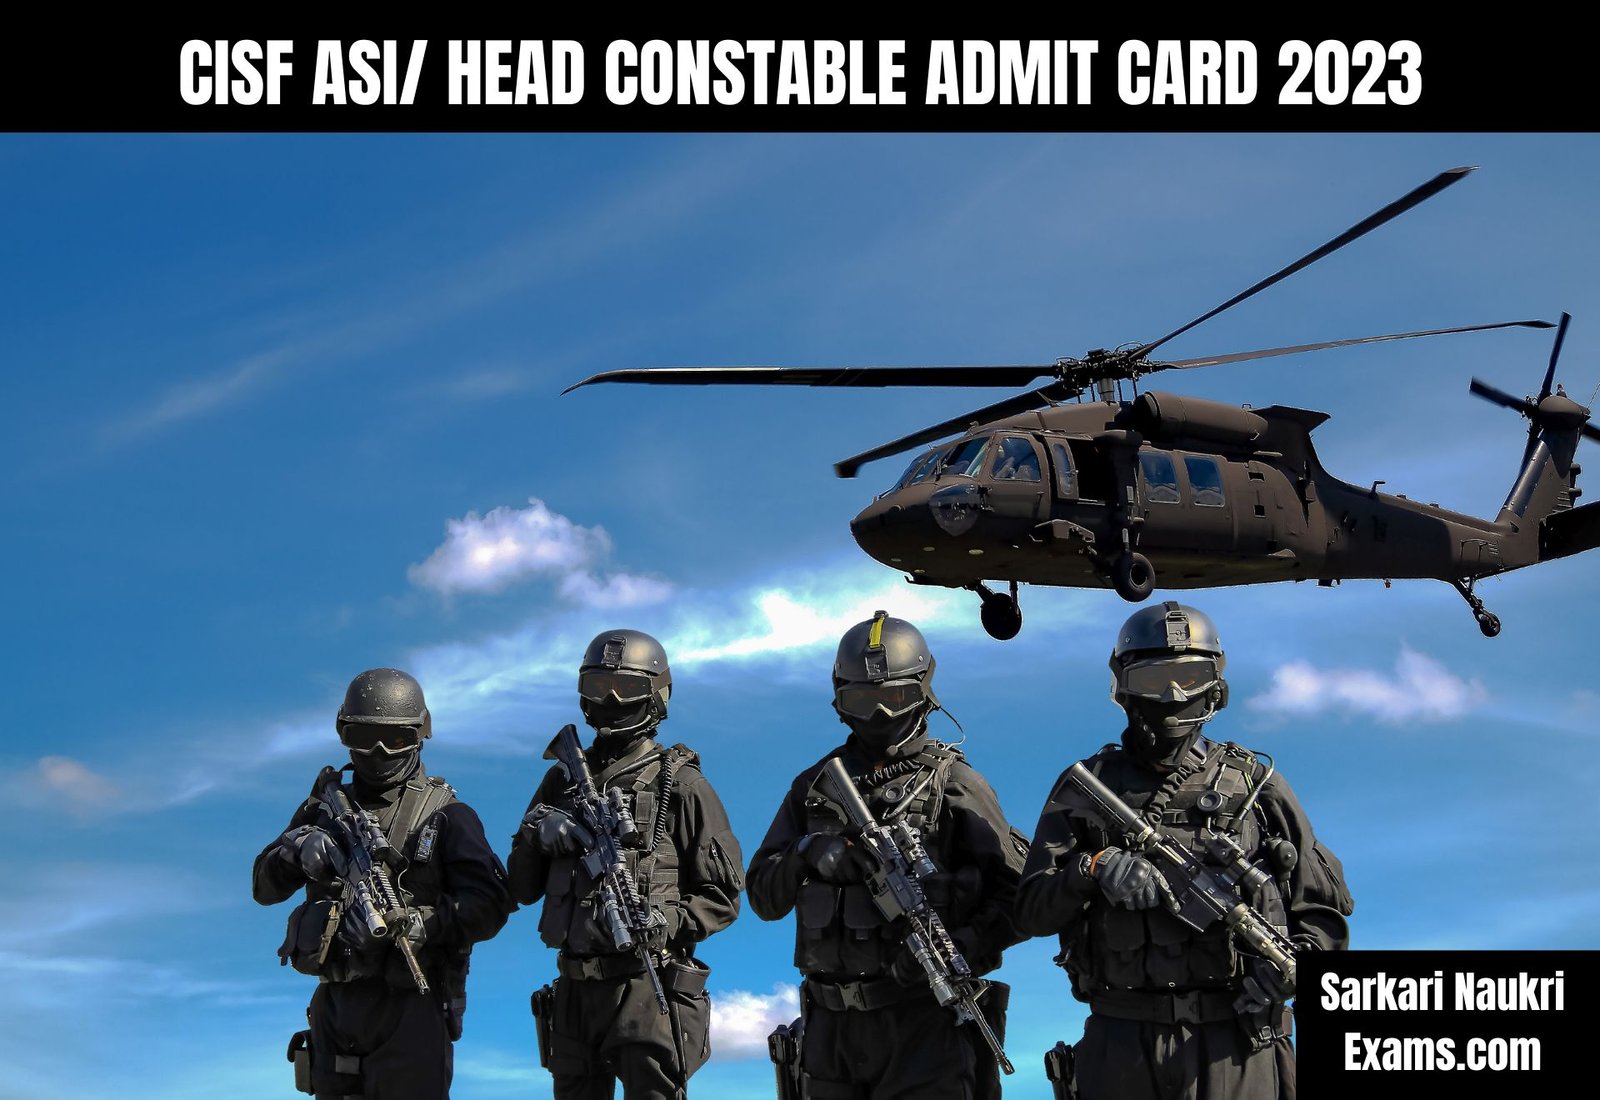 CISF ASI/ Head Constable Admit Card 2023 (OUT) | Download Link, Exam Date